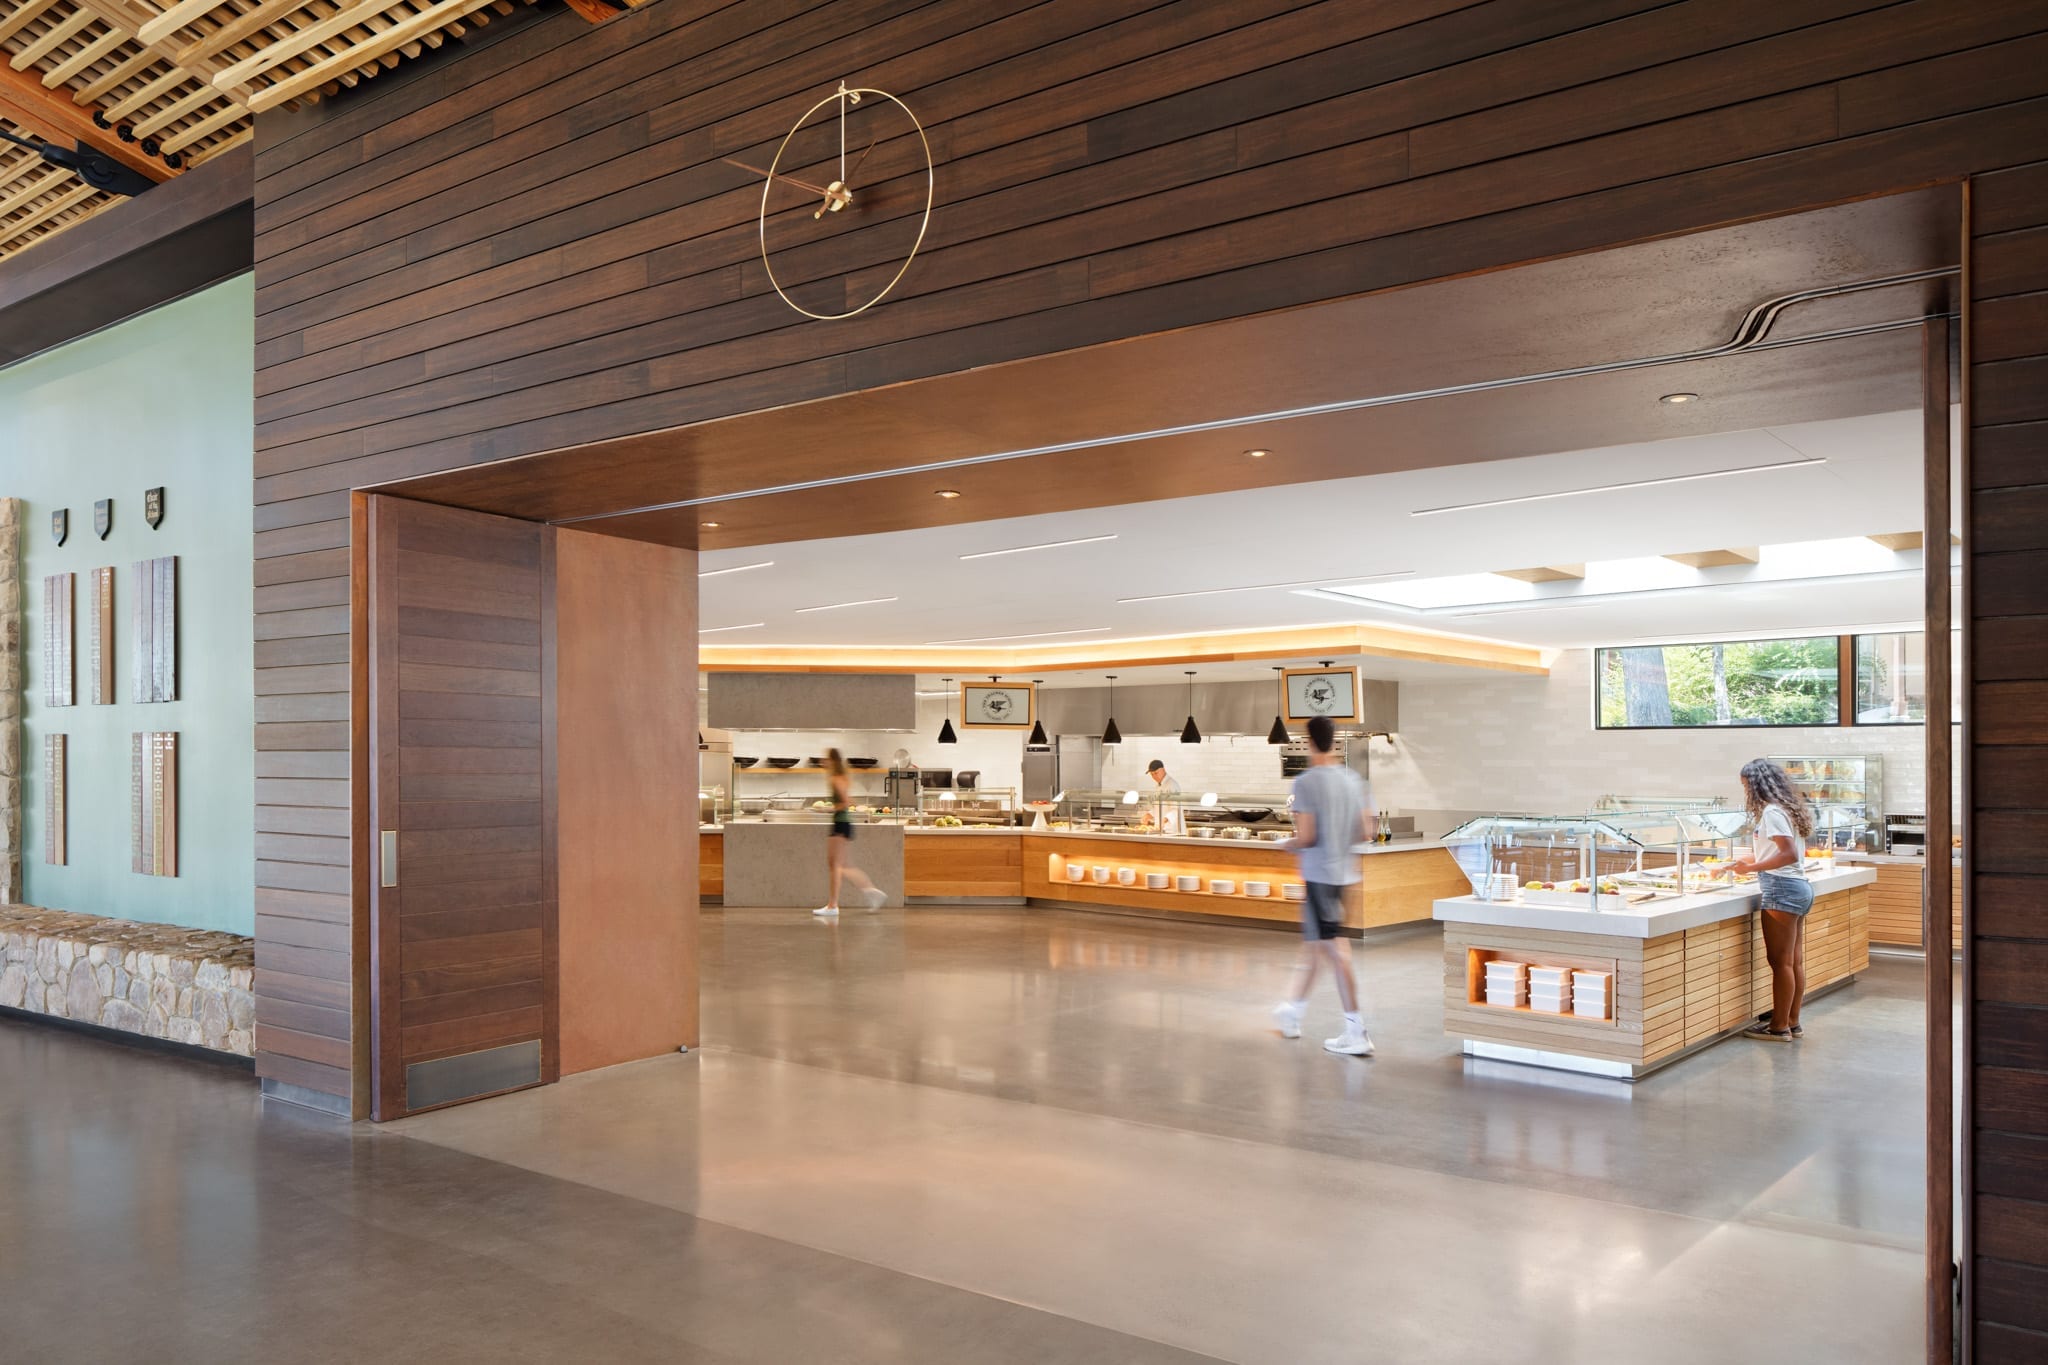 Thacher School. New rustic dining facility with chefs and self-serve counters.